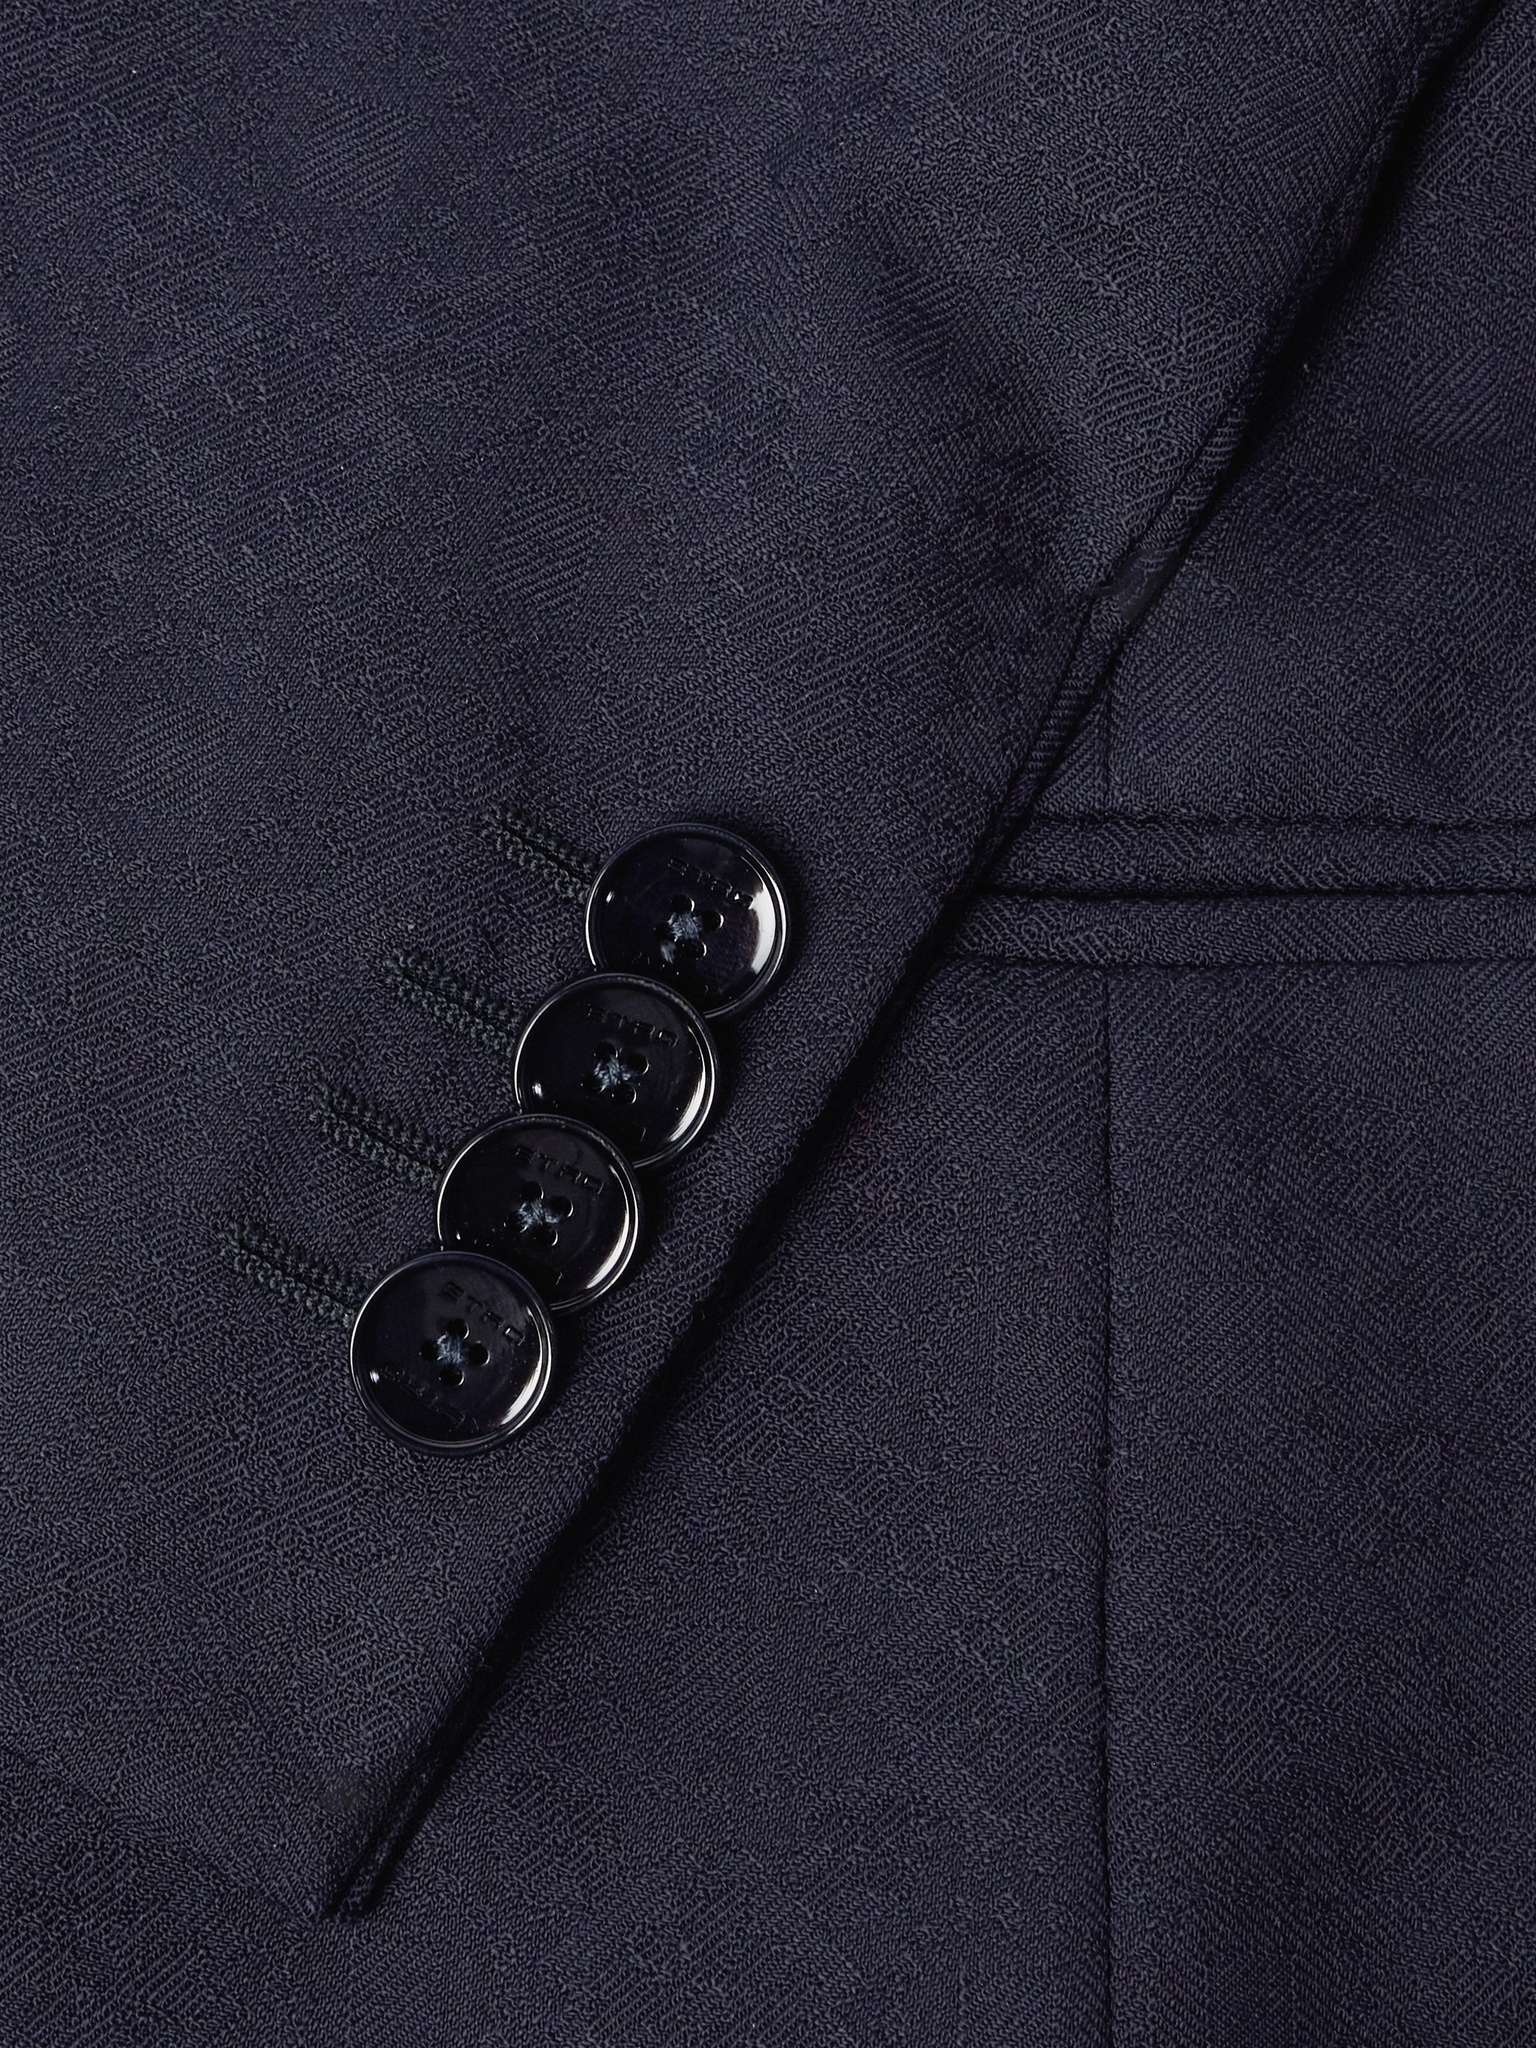 Double-Breasted Felt-Trimmed Wool-Jacquard Suit Jacket - 5